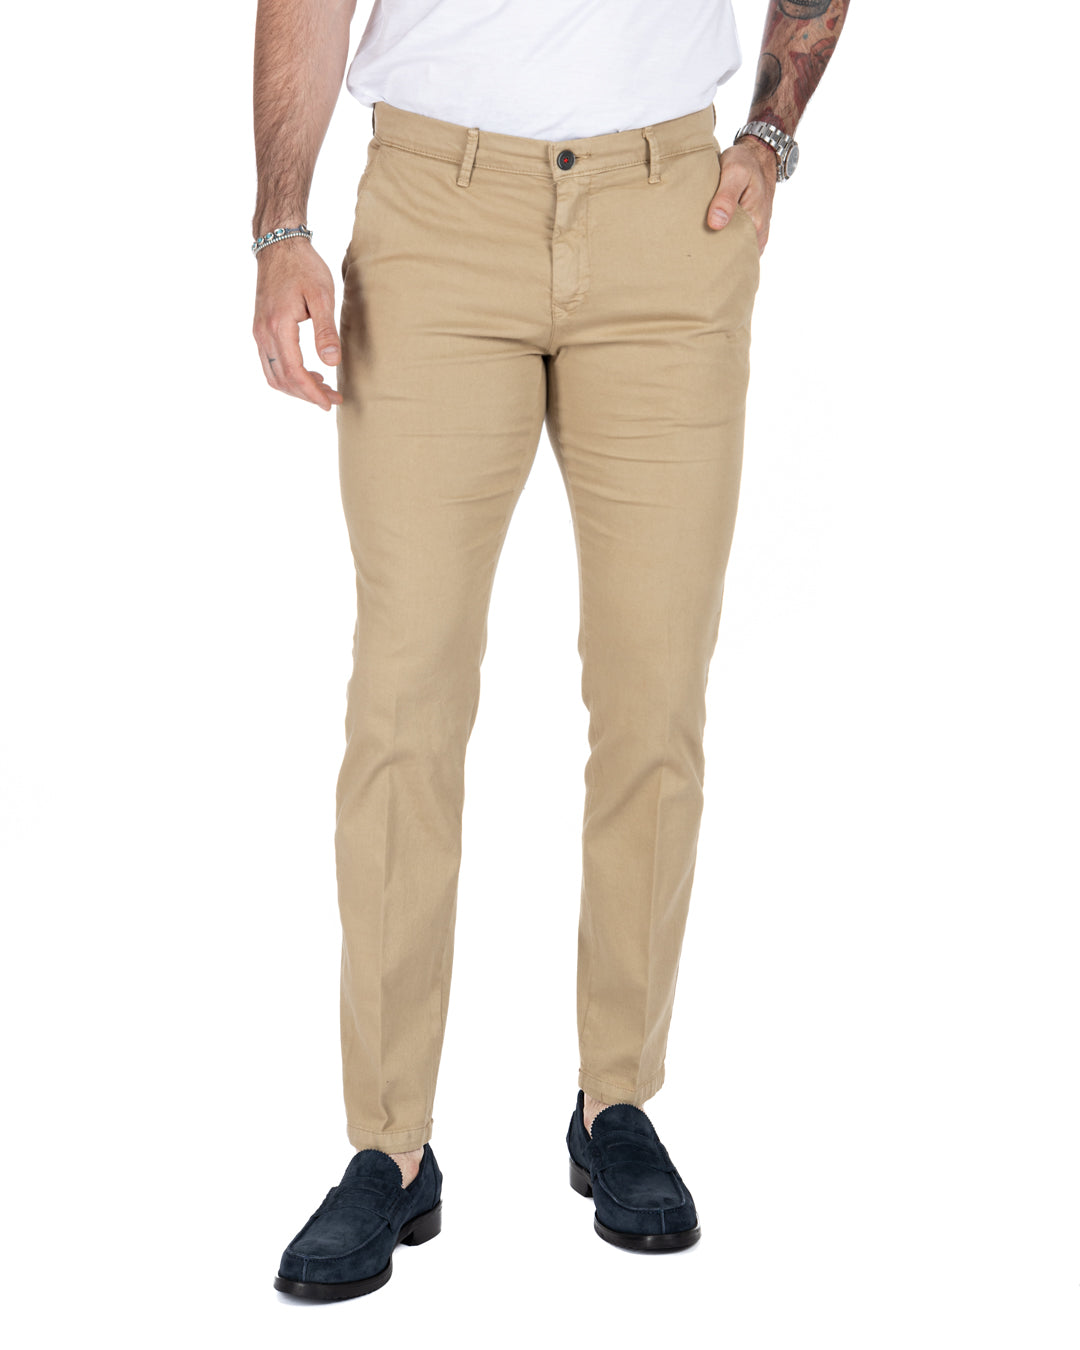 Bill - camel armored trousers